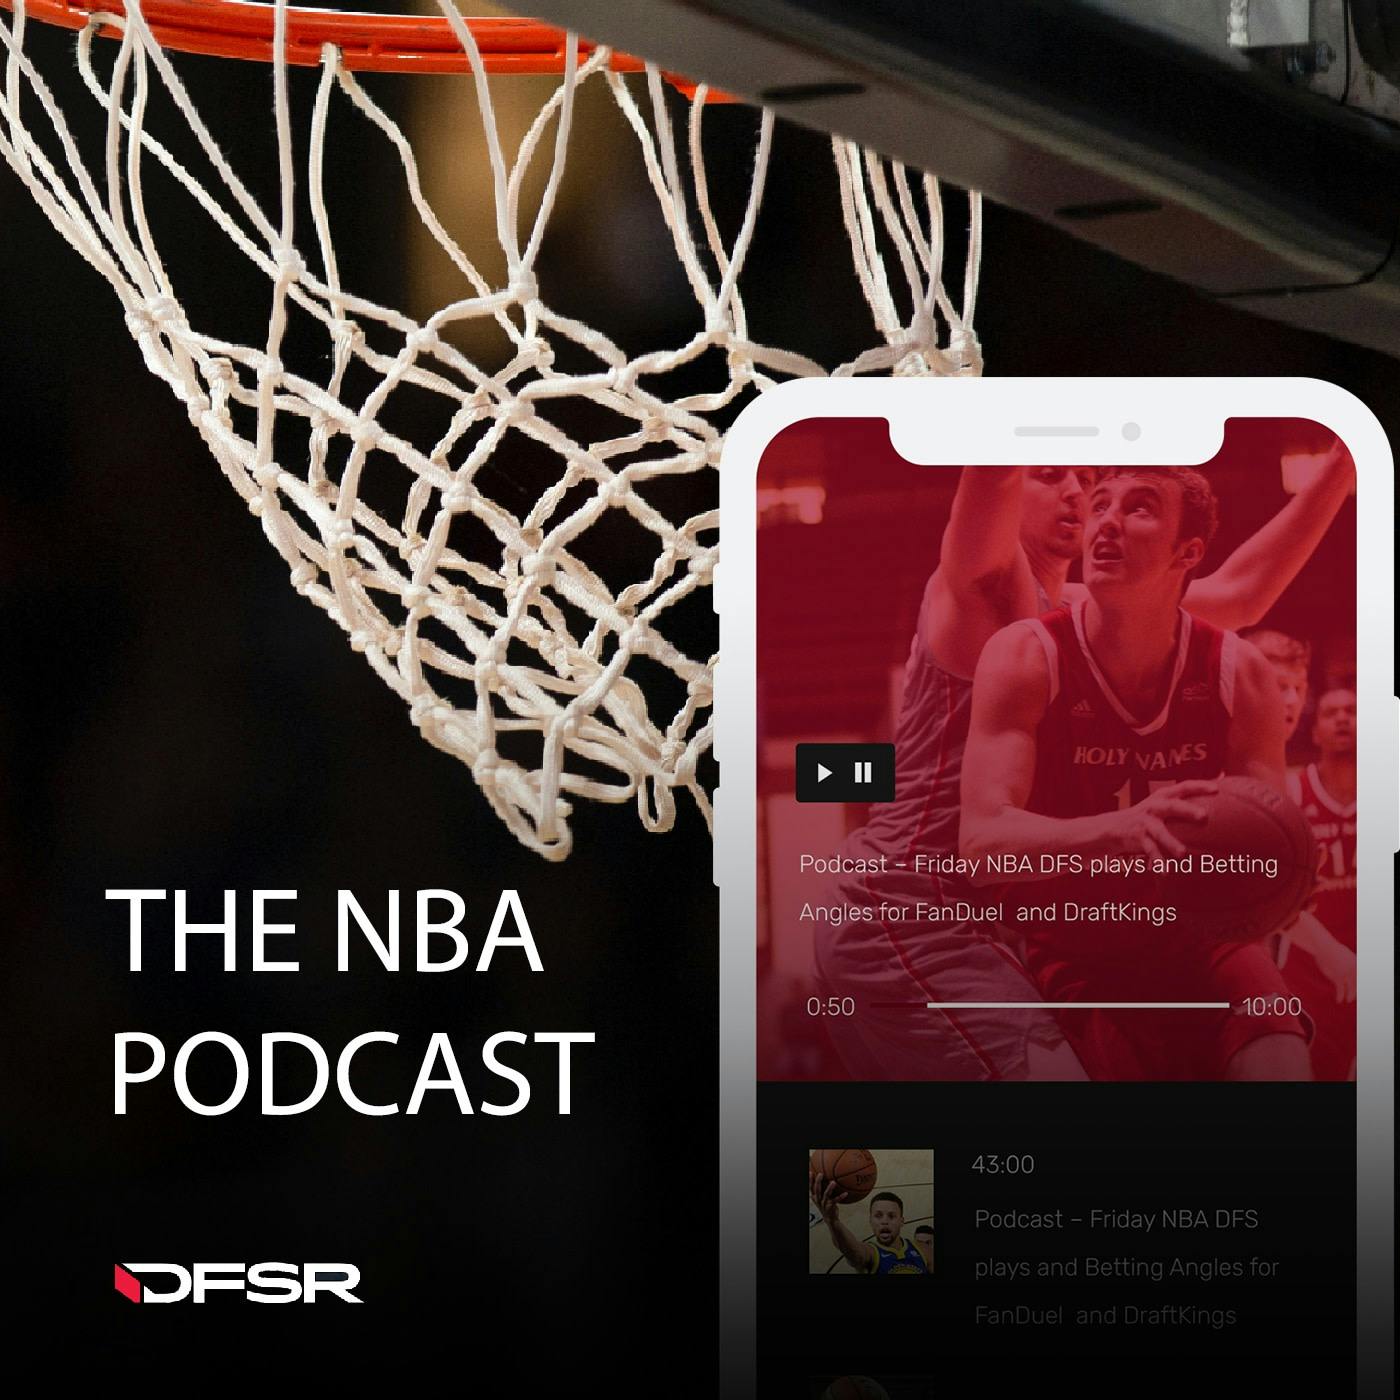 DFS NBA Podcast for FanDuel and DraftKings -  Wednesday 11/14/18